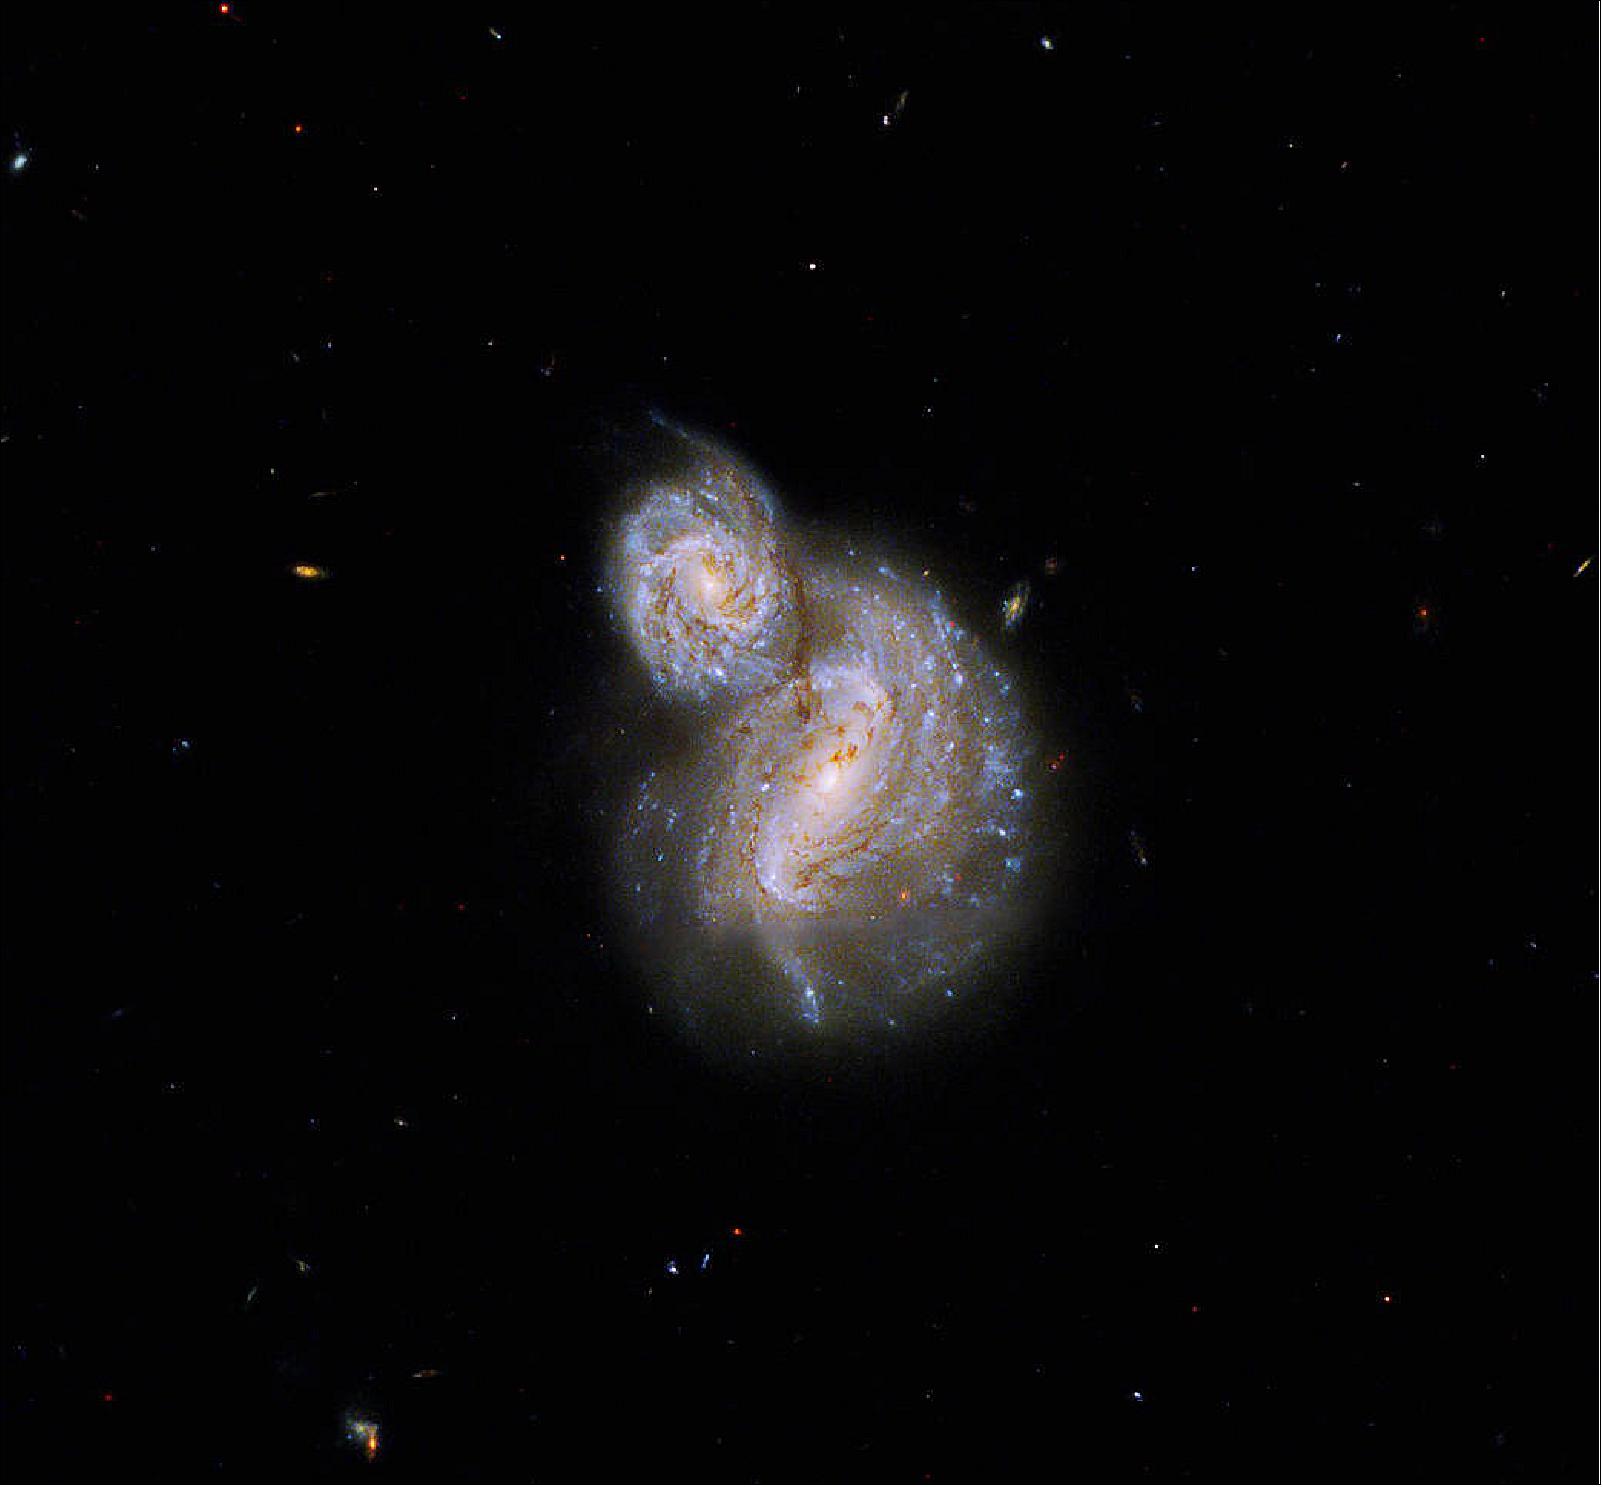 Figure 34: The image uses data collected during Hubble observations designed to study the role of dust in shaping the energy distributions of low mass disk galaxies. The Hubble observations looked at six pairs of galaxies where one was in front of the other. The broad range of light that Hubble’s Wide Field Camera 3 is sensitive to, along with its resolution, allowed the researchers to map the foreground galaxy’s dust disk in fine detail across ultra-violet, visible, and infrared light. Because IC 4271 is a Type II Seyfert Galaxy, visible and infrared wavelengths of light dominate the image. The colors in this image are primarily visible light, while the color violet represents ultraviolet light and red represents near infrared light [image credit: NASA, ESA, and B. Holwerda (University of Louisville Research Foundation, Inc.); Image processing: G. Kober (NASA Goddard/Catholic University of America)]